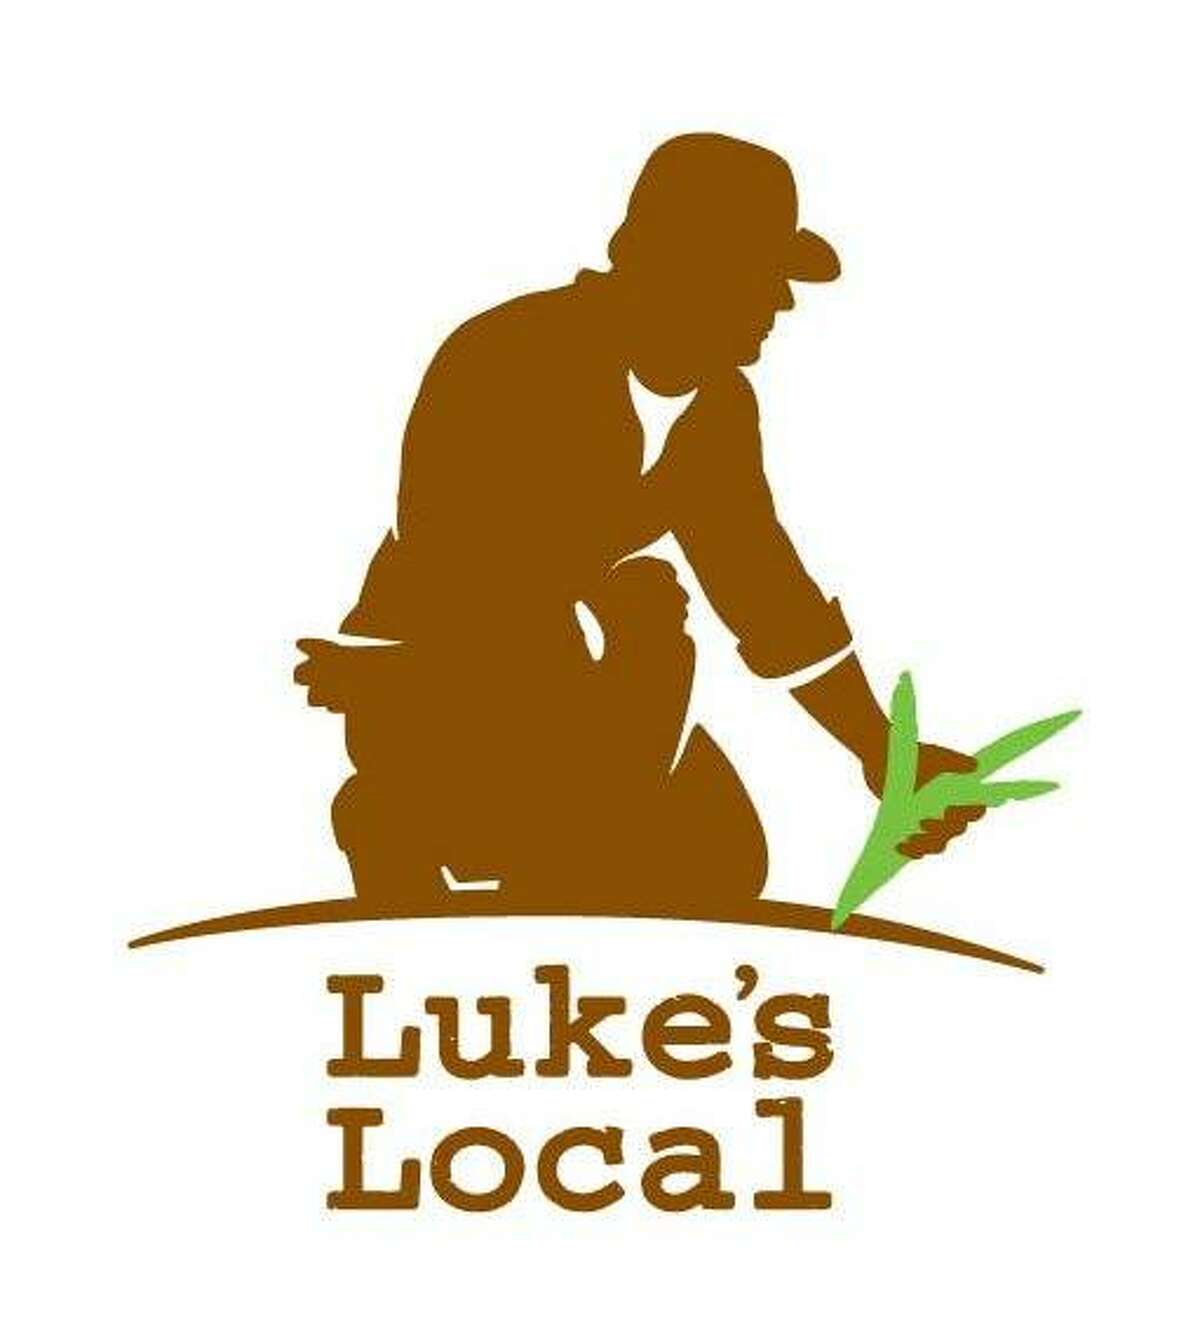 The logo from Luke's Local, a tiny food shop at the CalTrain station in Palo Alto.